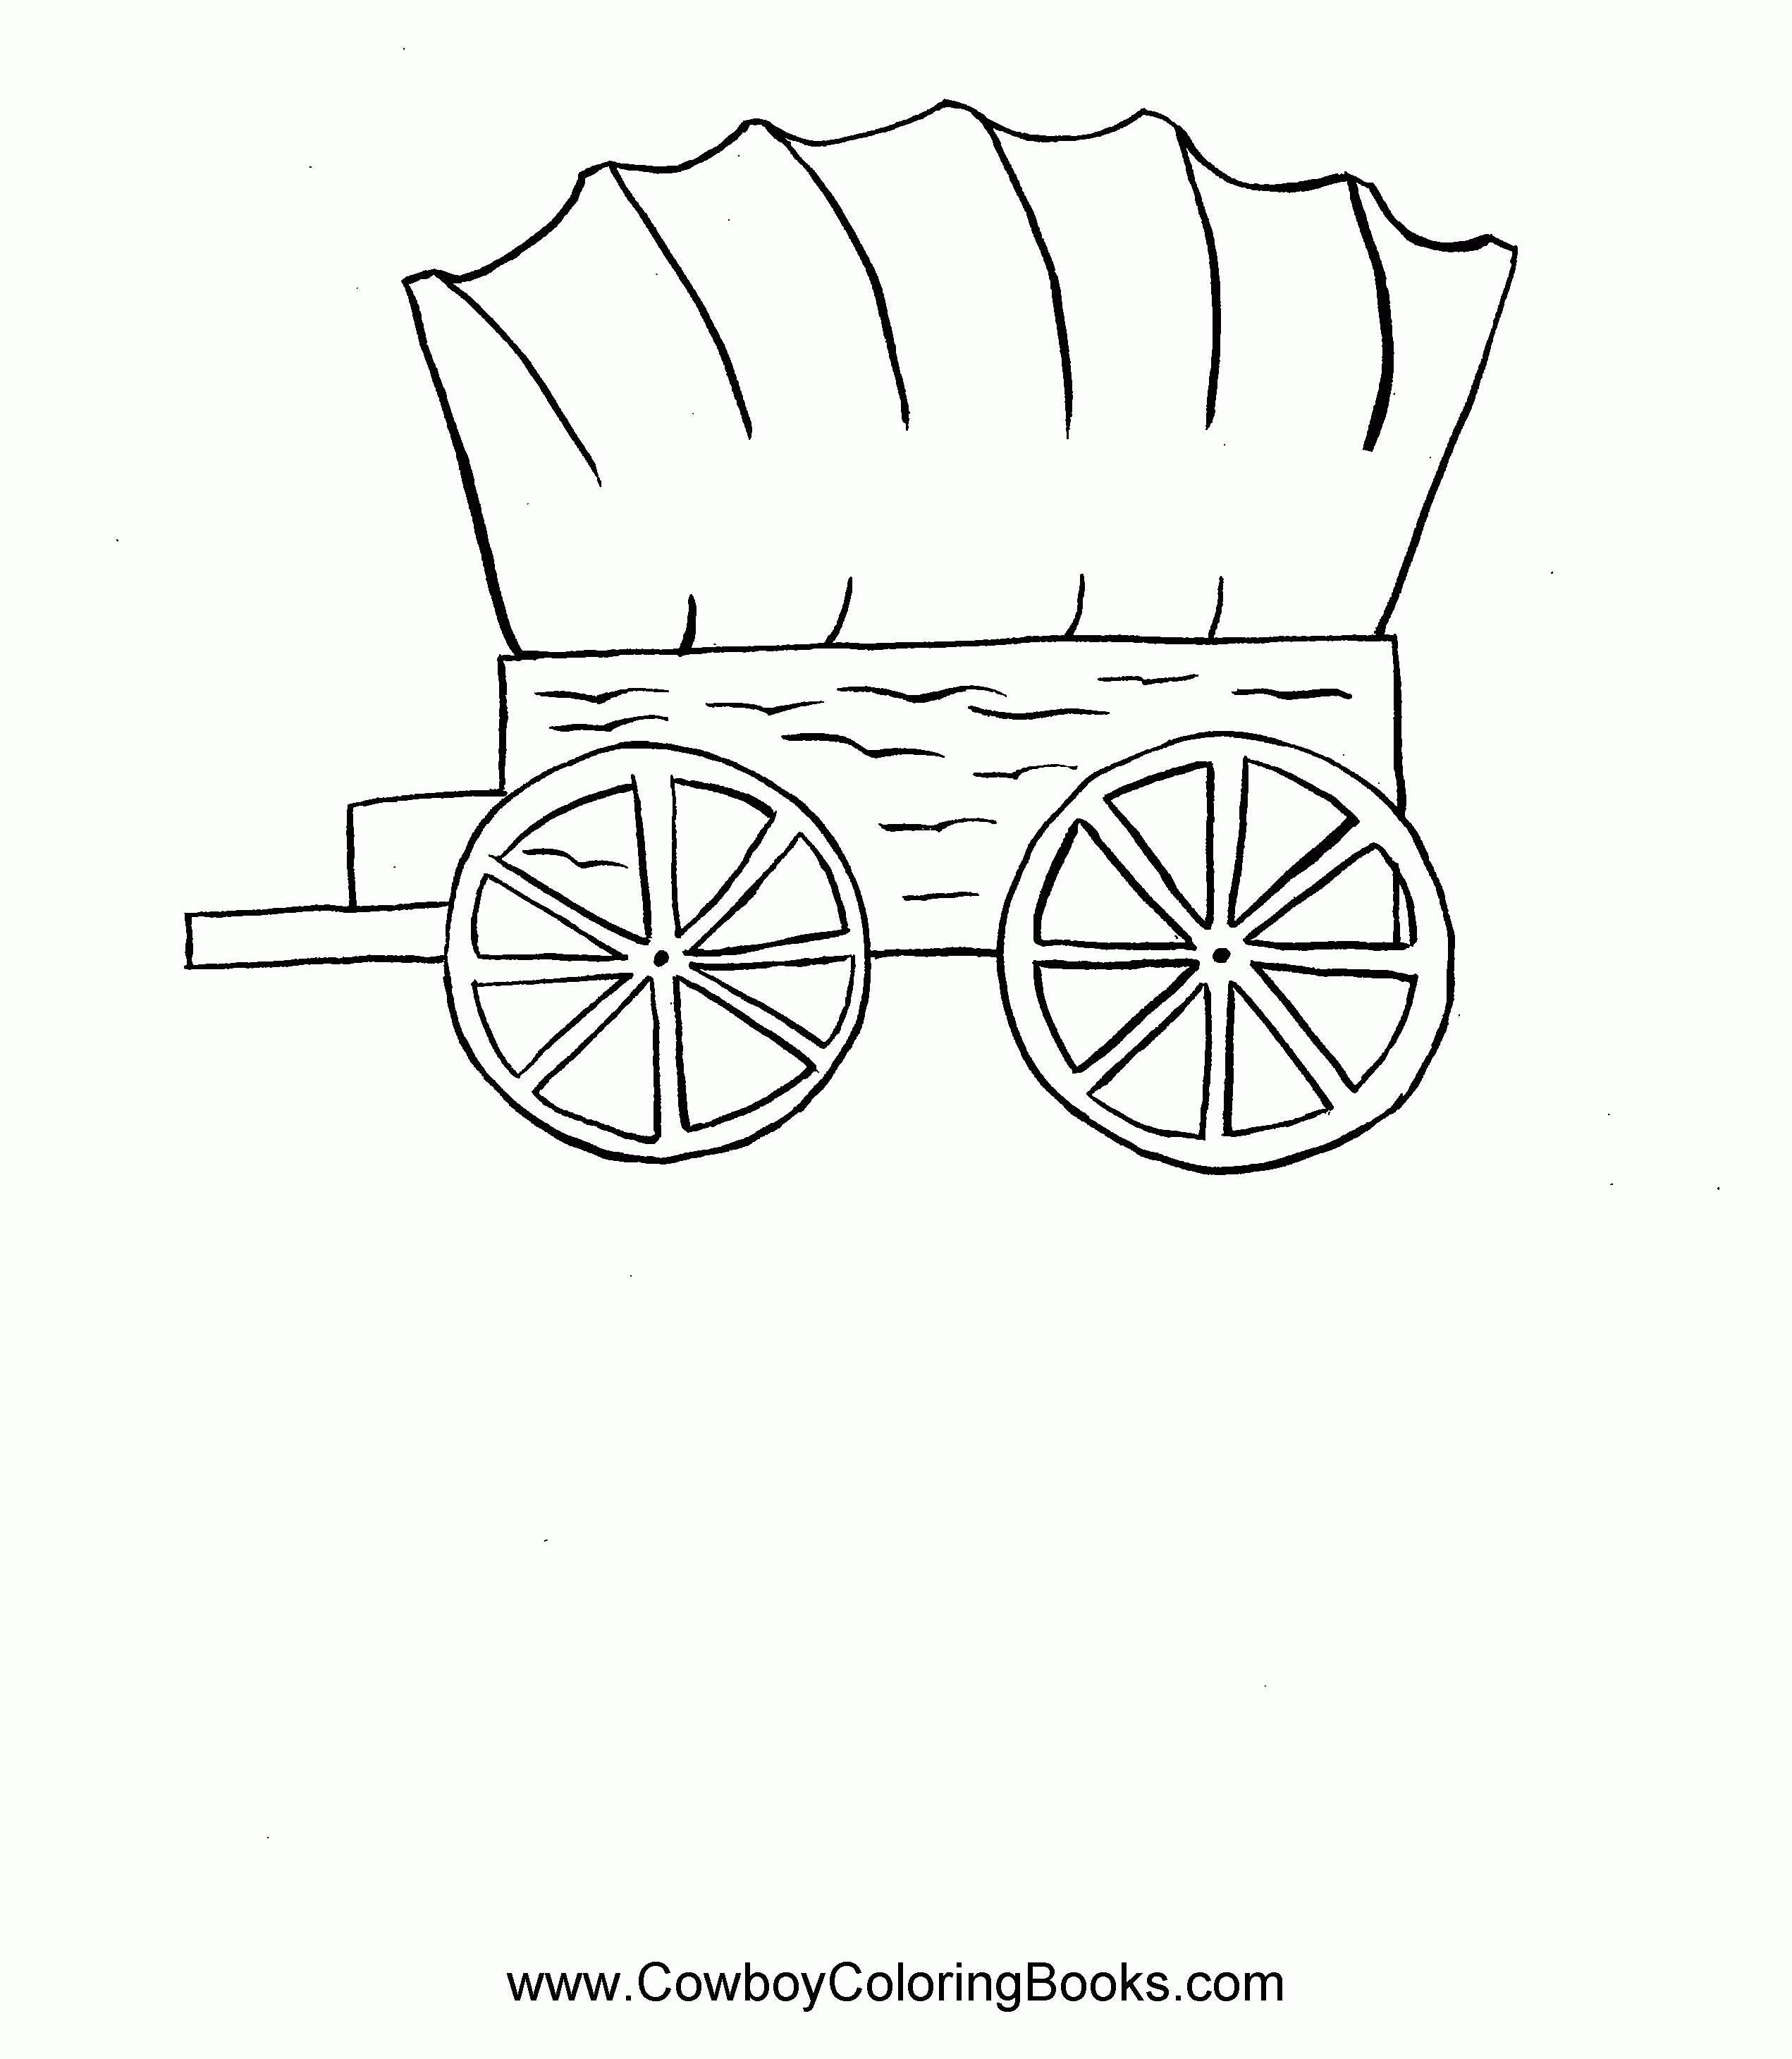 Cover Wagon Coloring Pages - Coloring Home